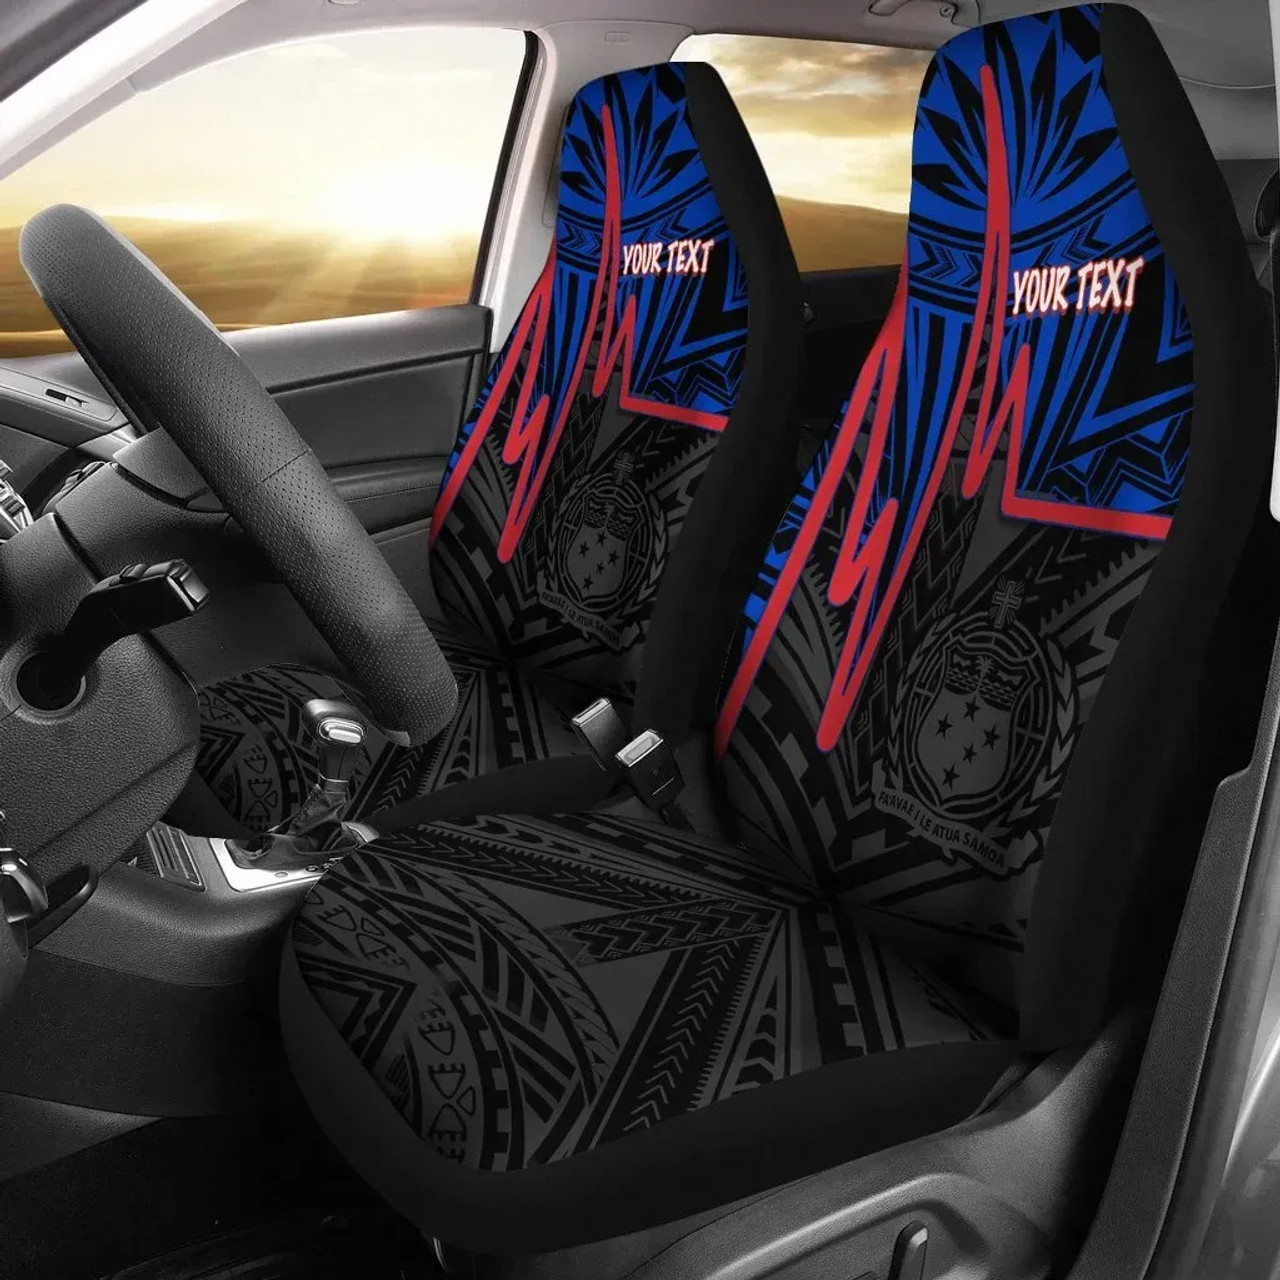 Samoa Personalised Car Seat Covers - Samoa Seal With Polynesian Patterns In Heartbeat Style (Blue)